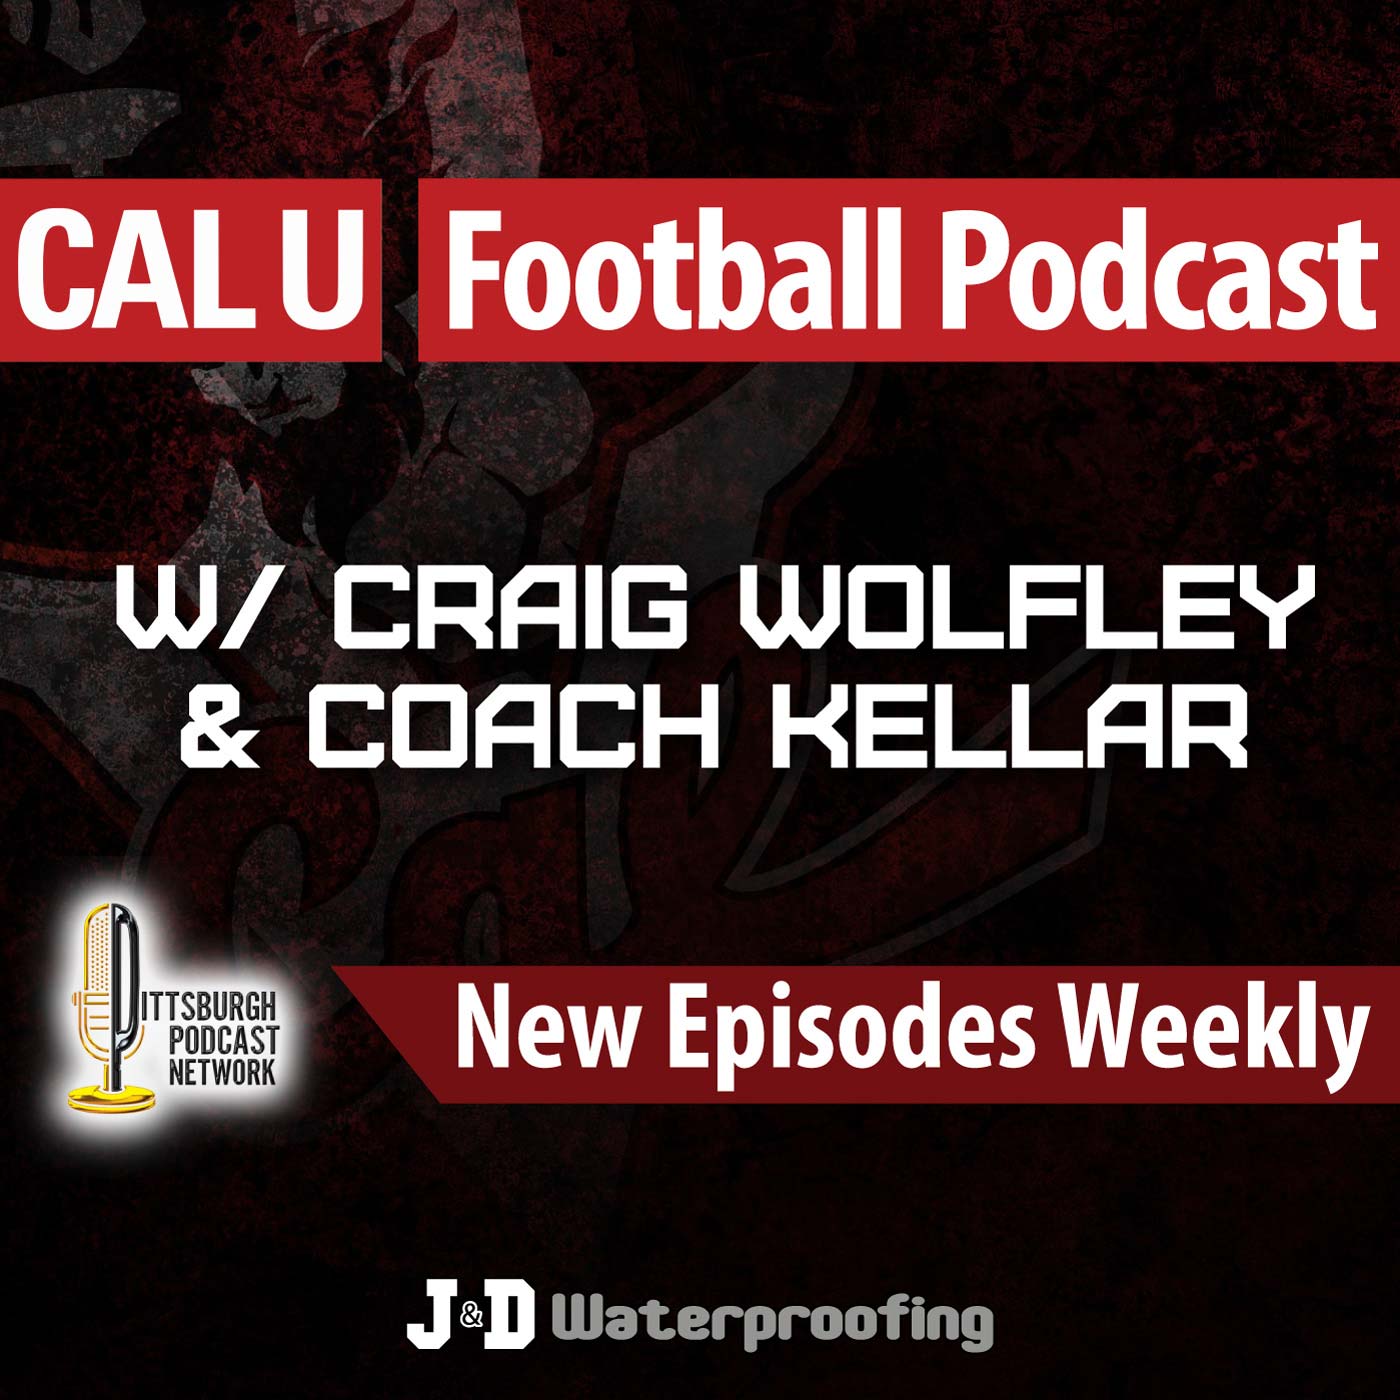 Cal U Football podcast Vulcans with craig wolfley and coach mike kellar